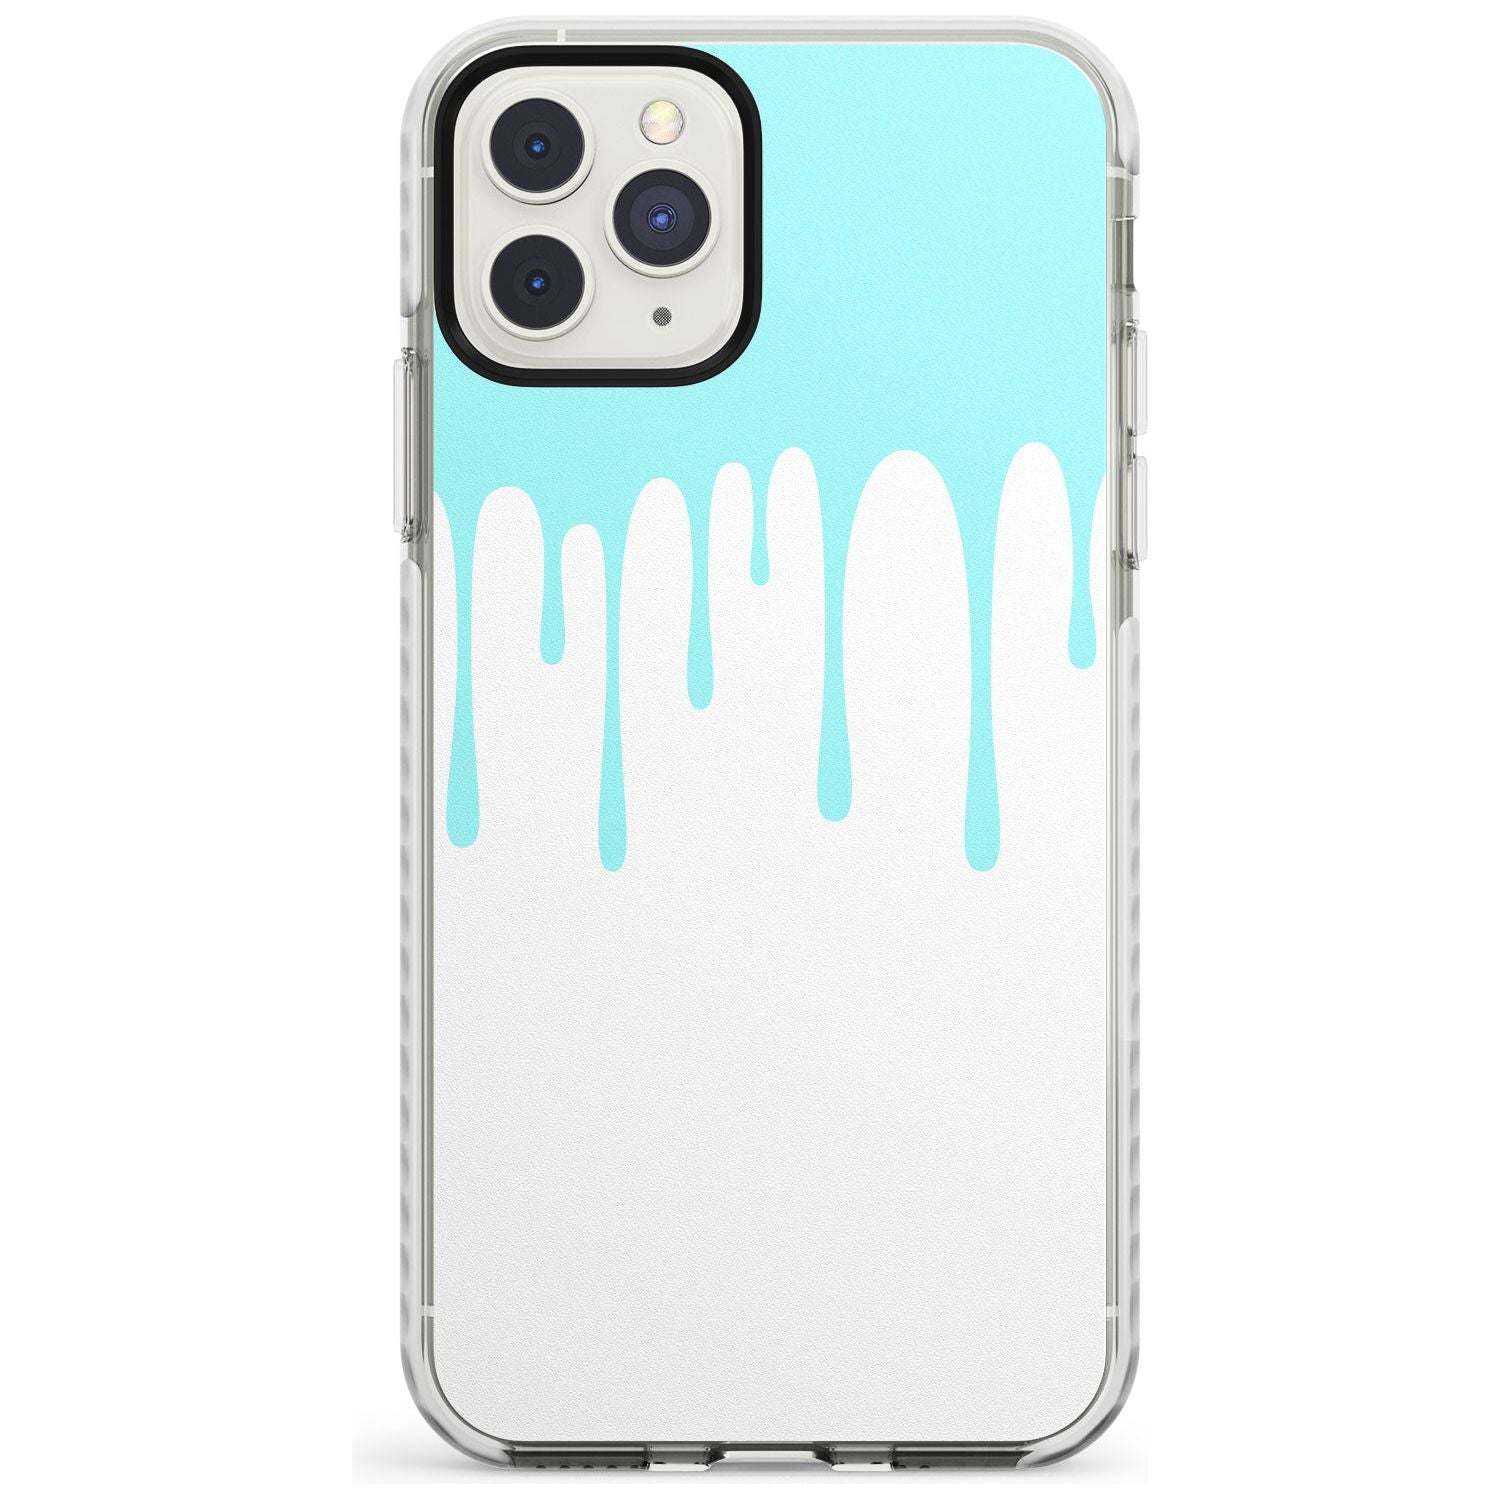 Melted Effect: Teal & White iPhone Case Impact Phone Case Warehouse 11 Pro Max